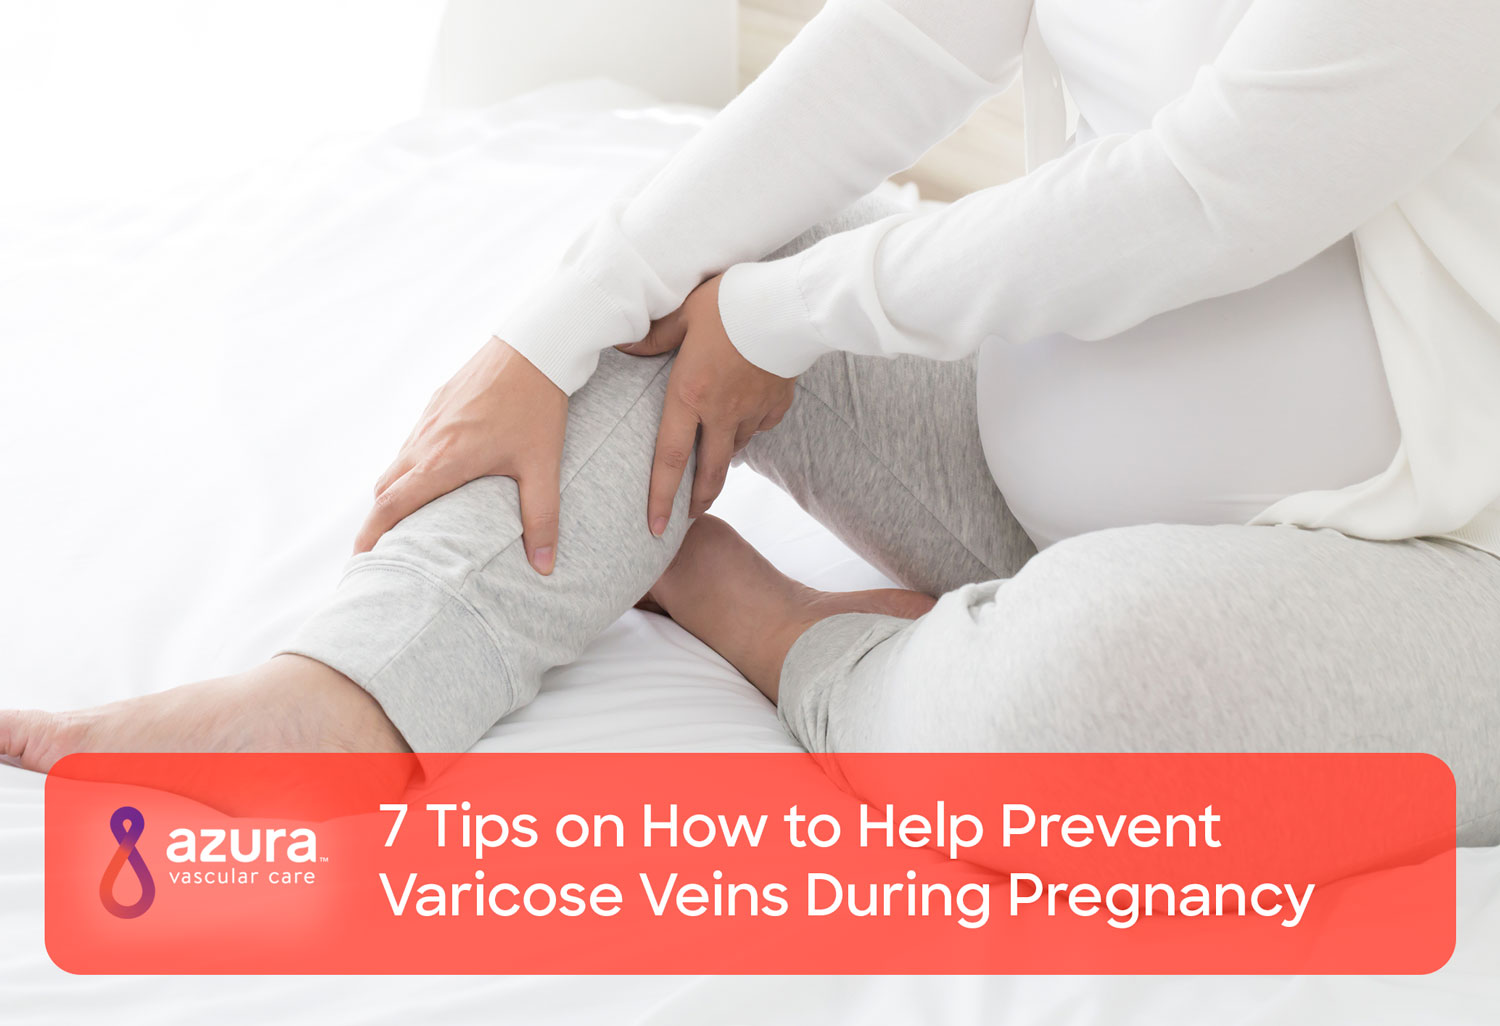 https://www.azuravascularcare.com//assets/7-Tips-on-How-to-Help-Prevent-Varicose-Veins-During-Pregnancy.jpg